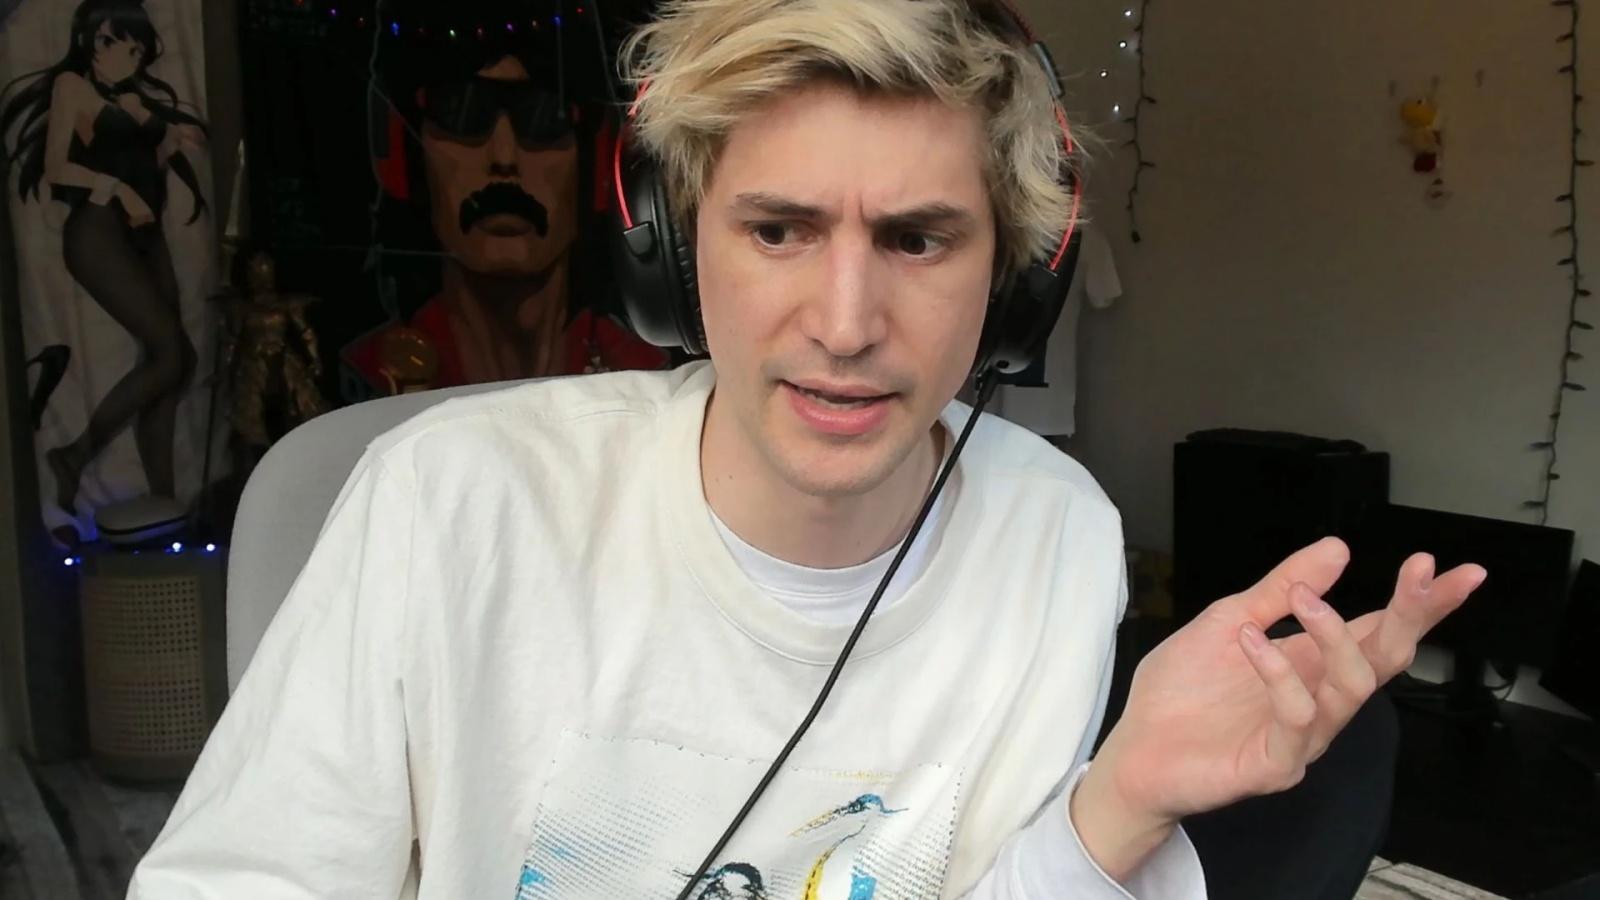 xqc speaks to the camera during a live stream